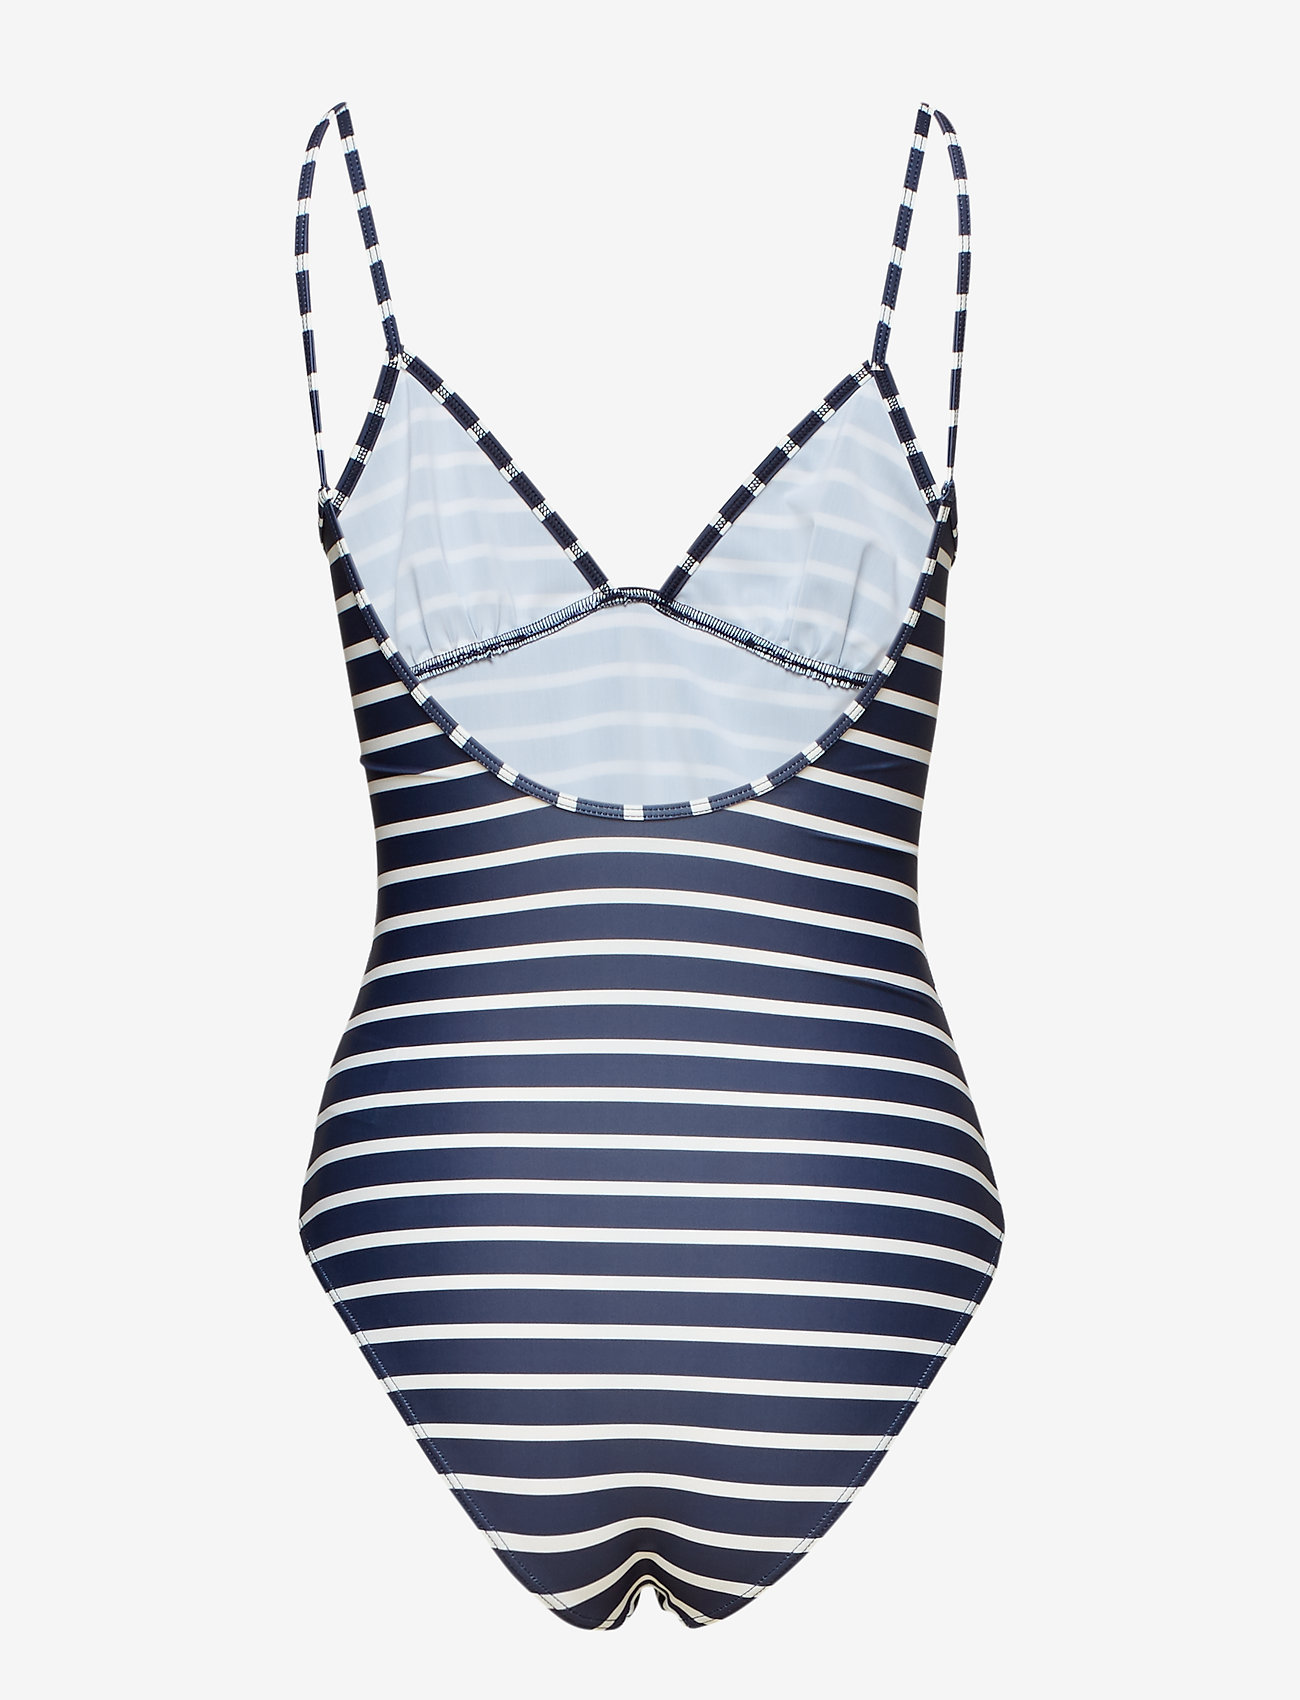 Double A by Wood Wood - Rio swimsuit - swimsuits - navy/offwhite stripe - 1